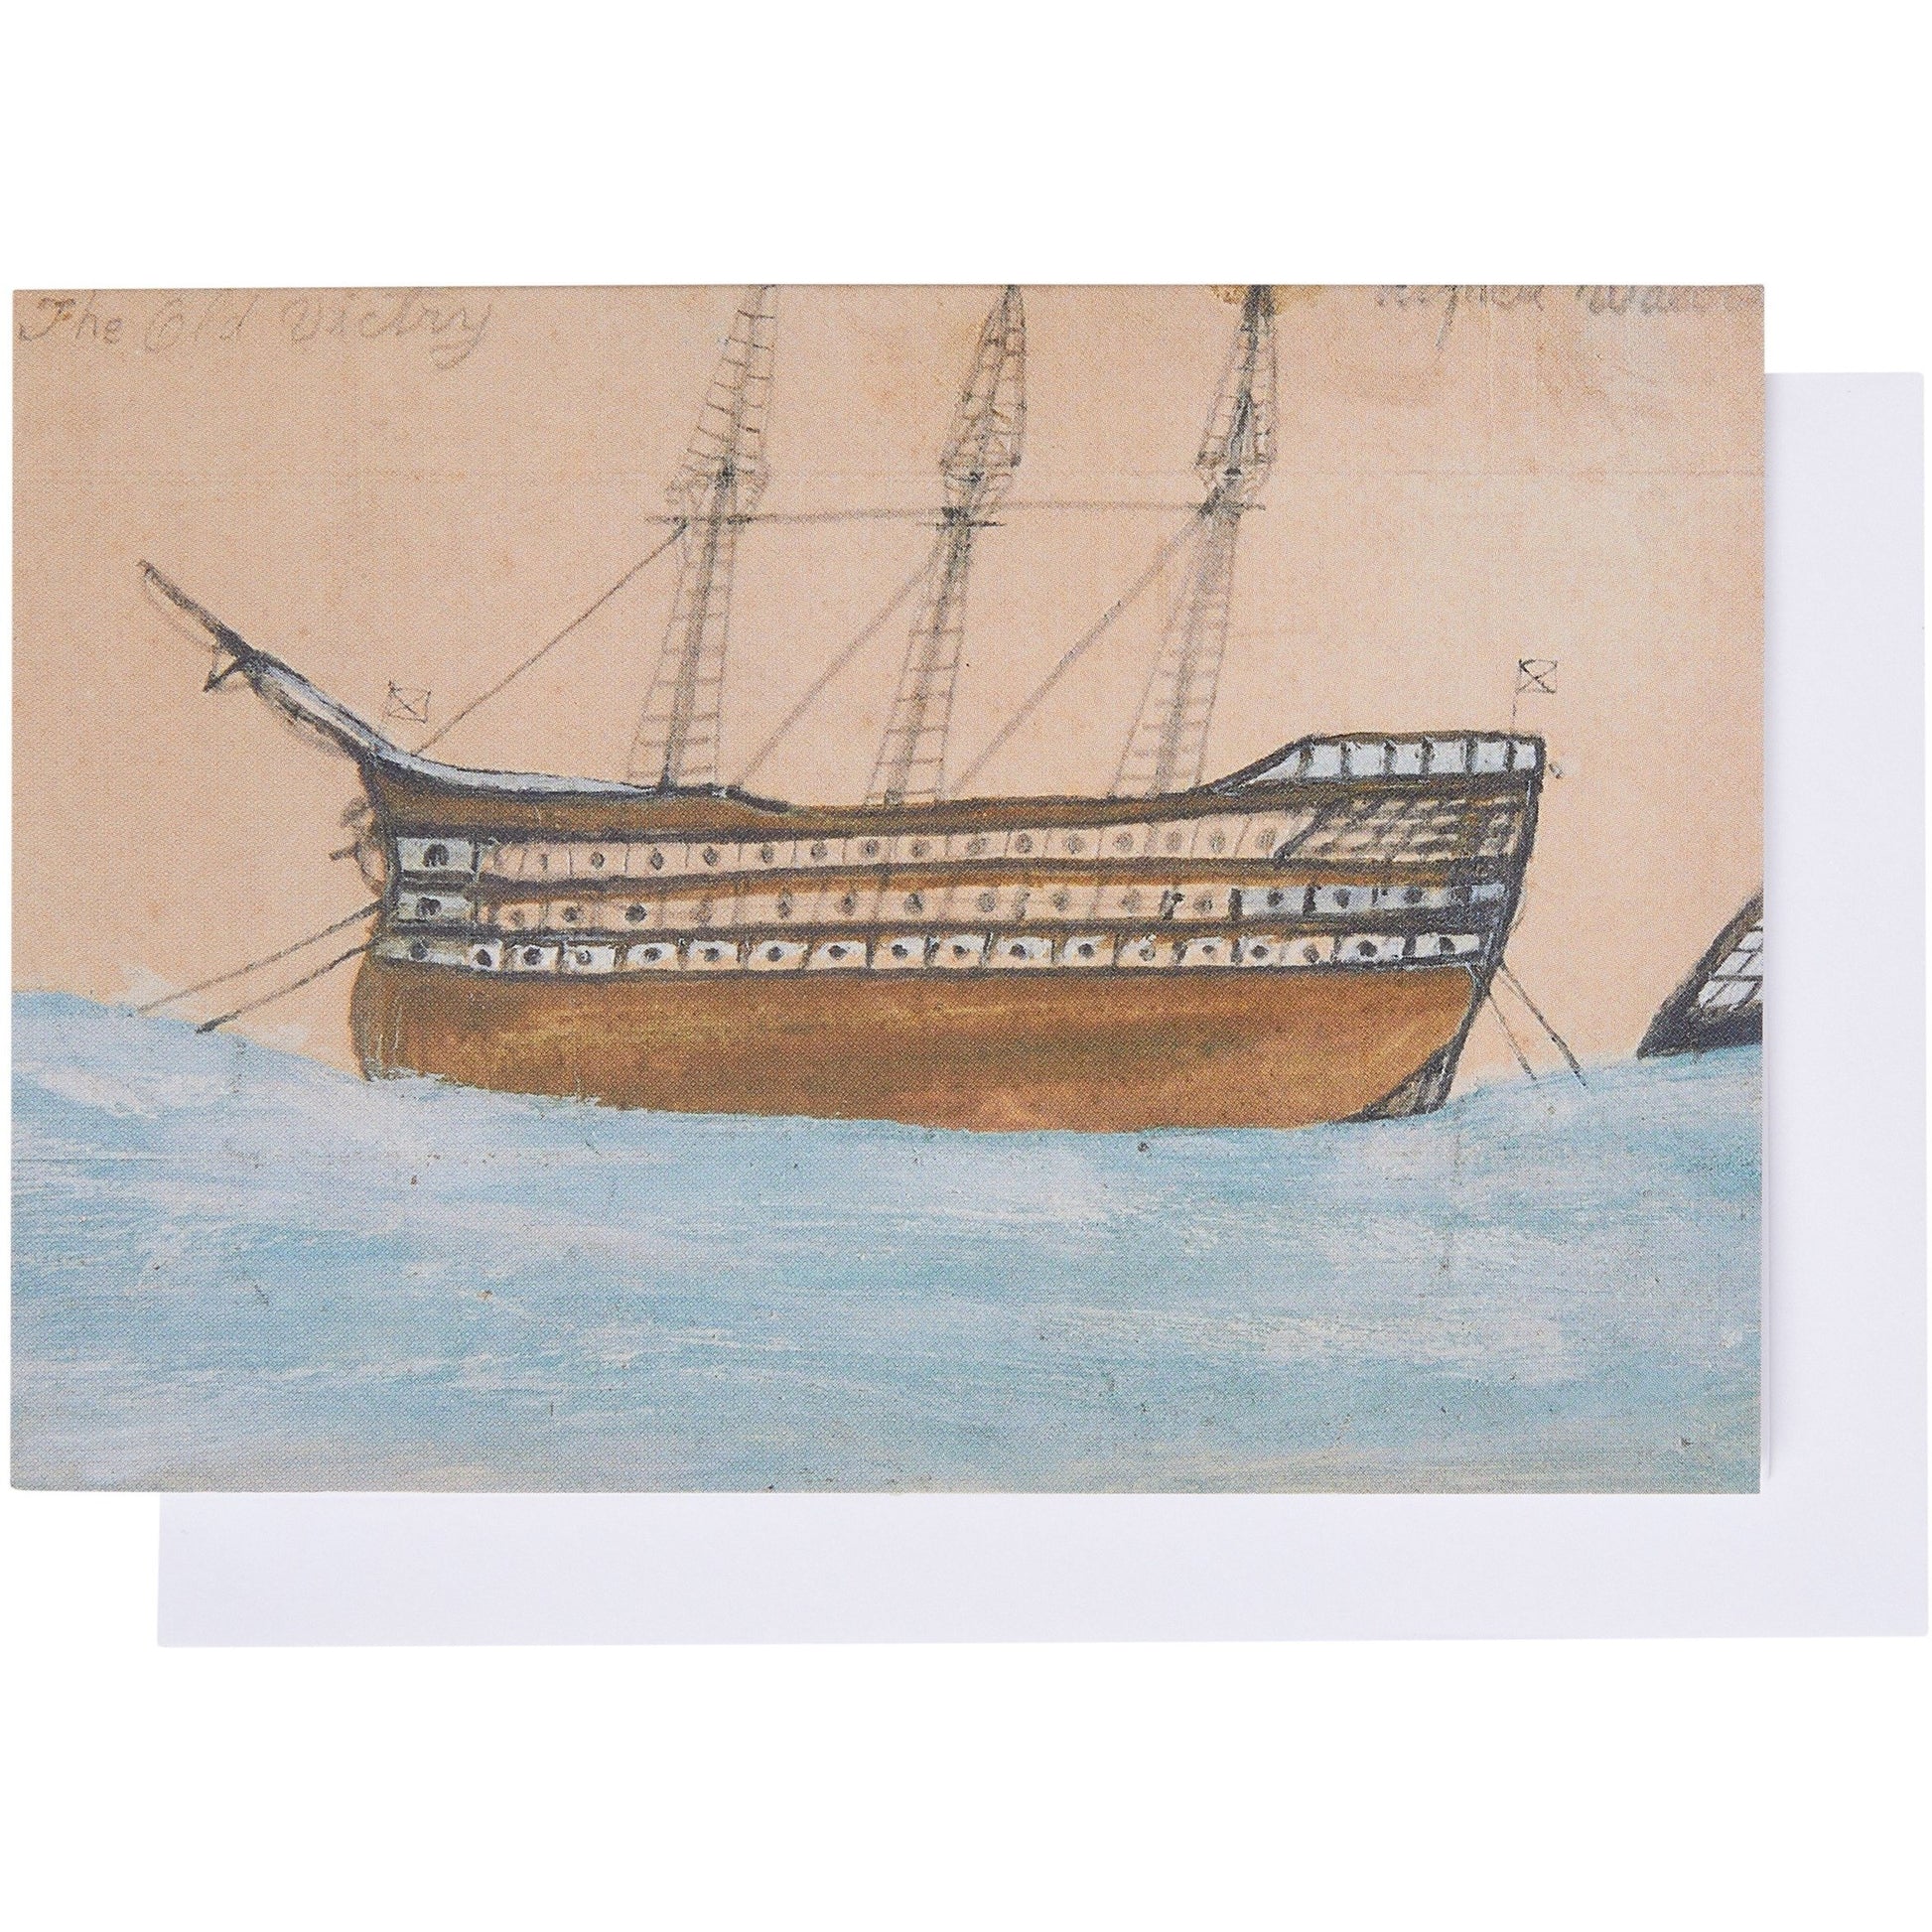 Notelet with envelope - The Old Victry - HMS Victory by Alfred Wallis. From the collection of Kettle's Yard, brought to you by CuratingCambridge.com